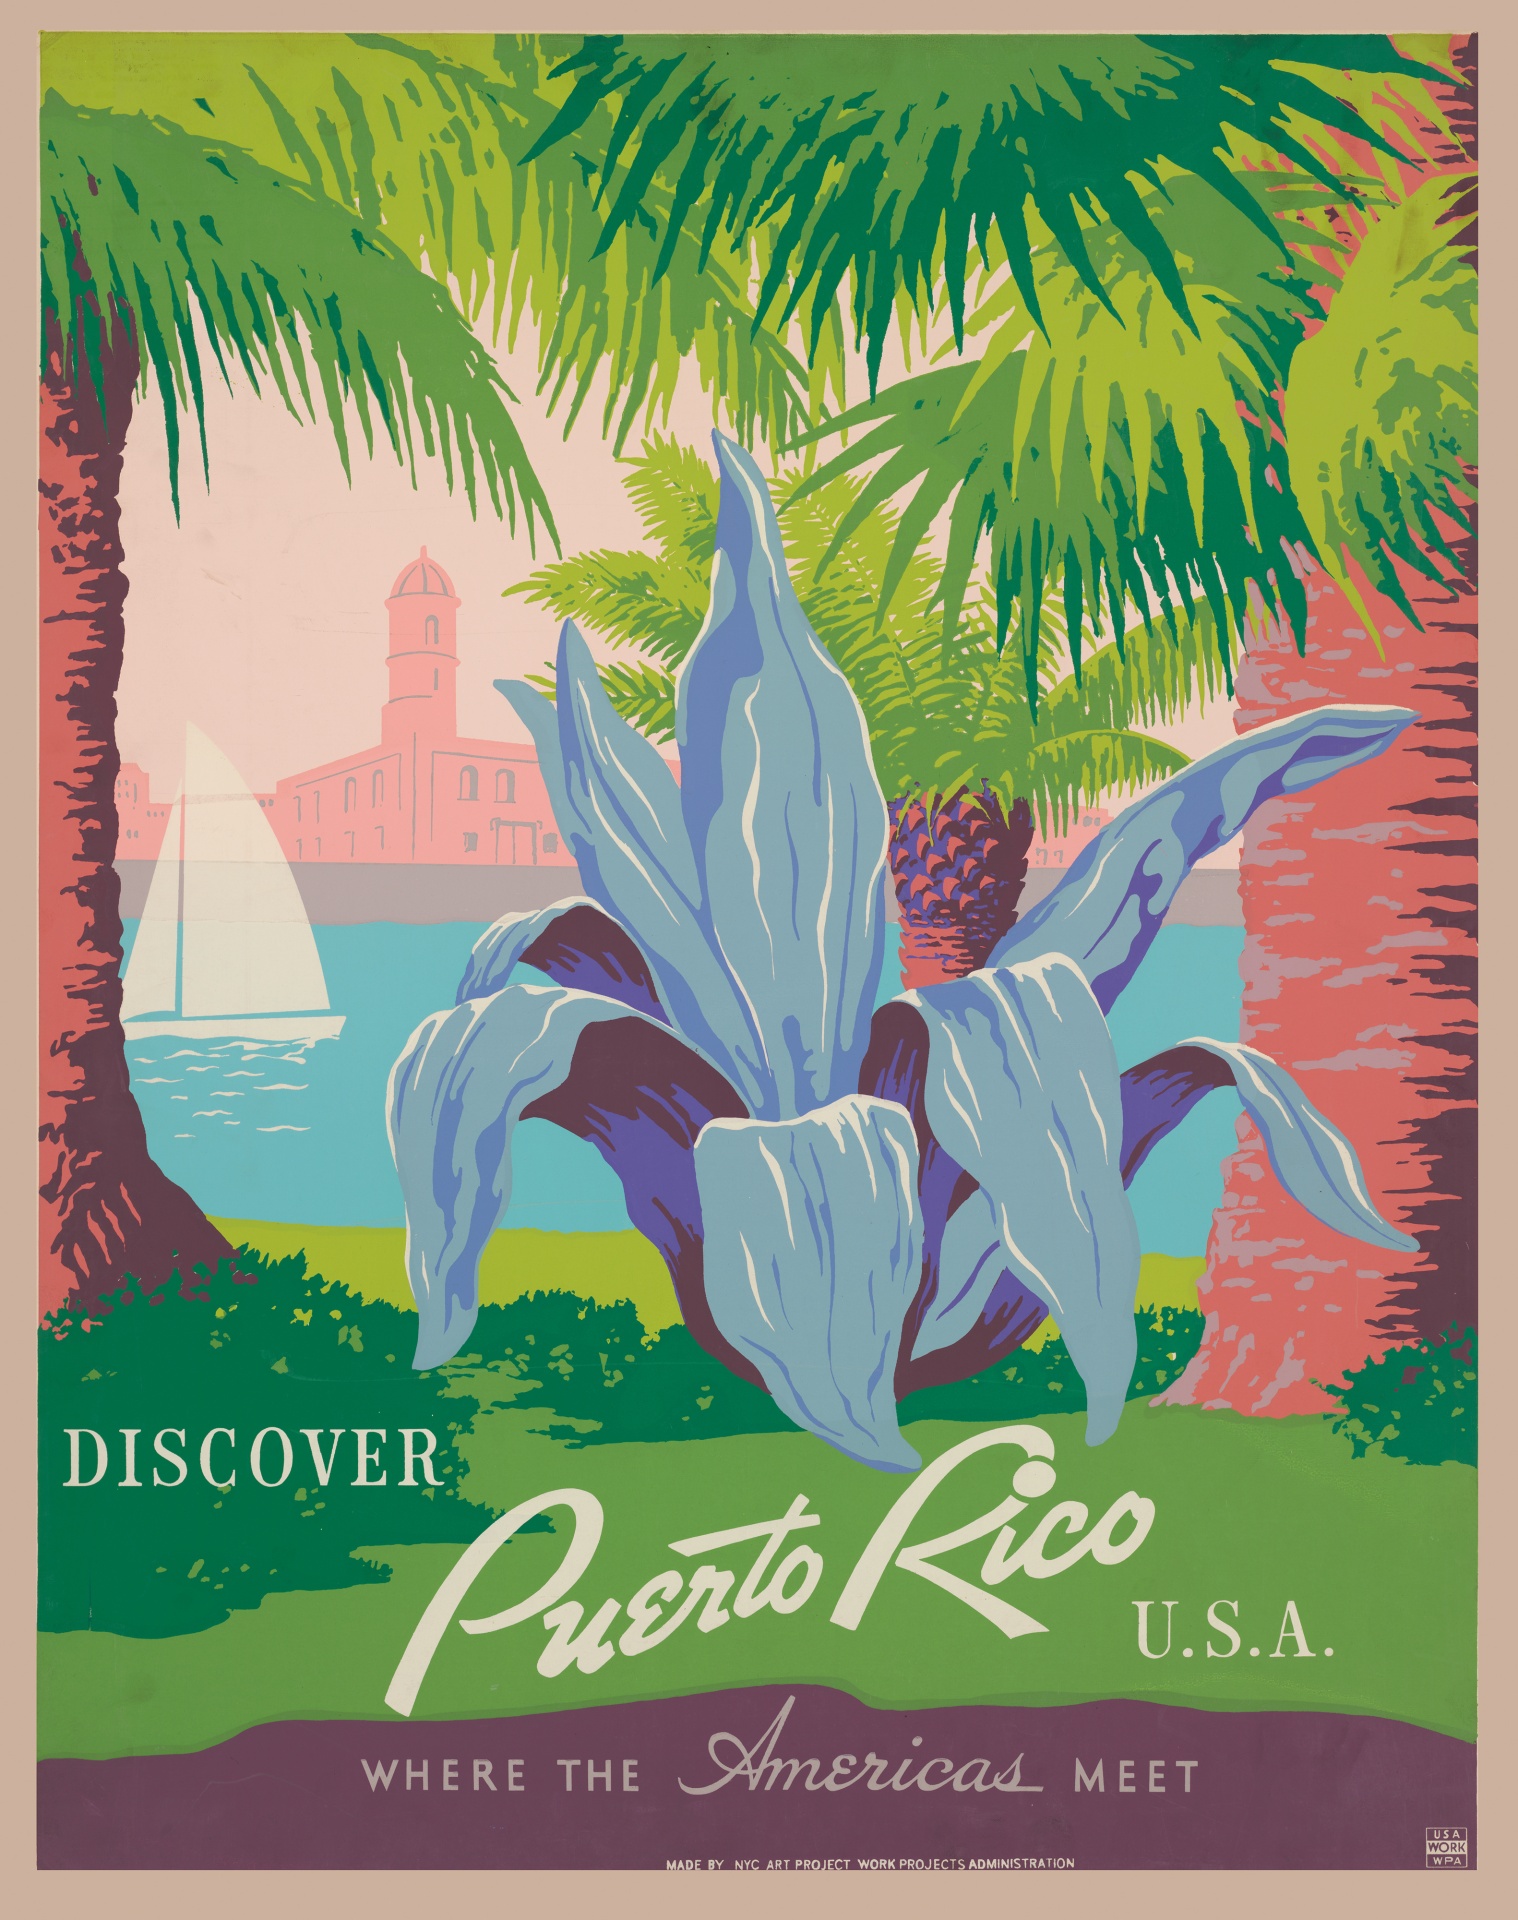 Vintage travel poster for Puerto Rico, USA, America